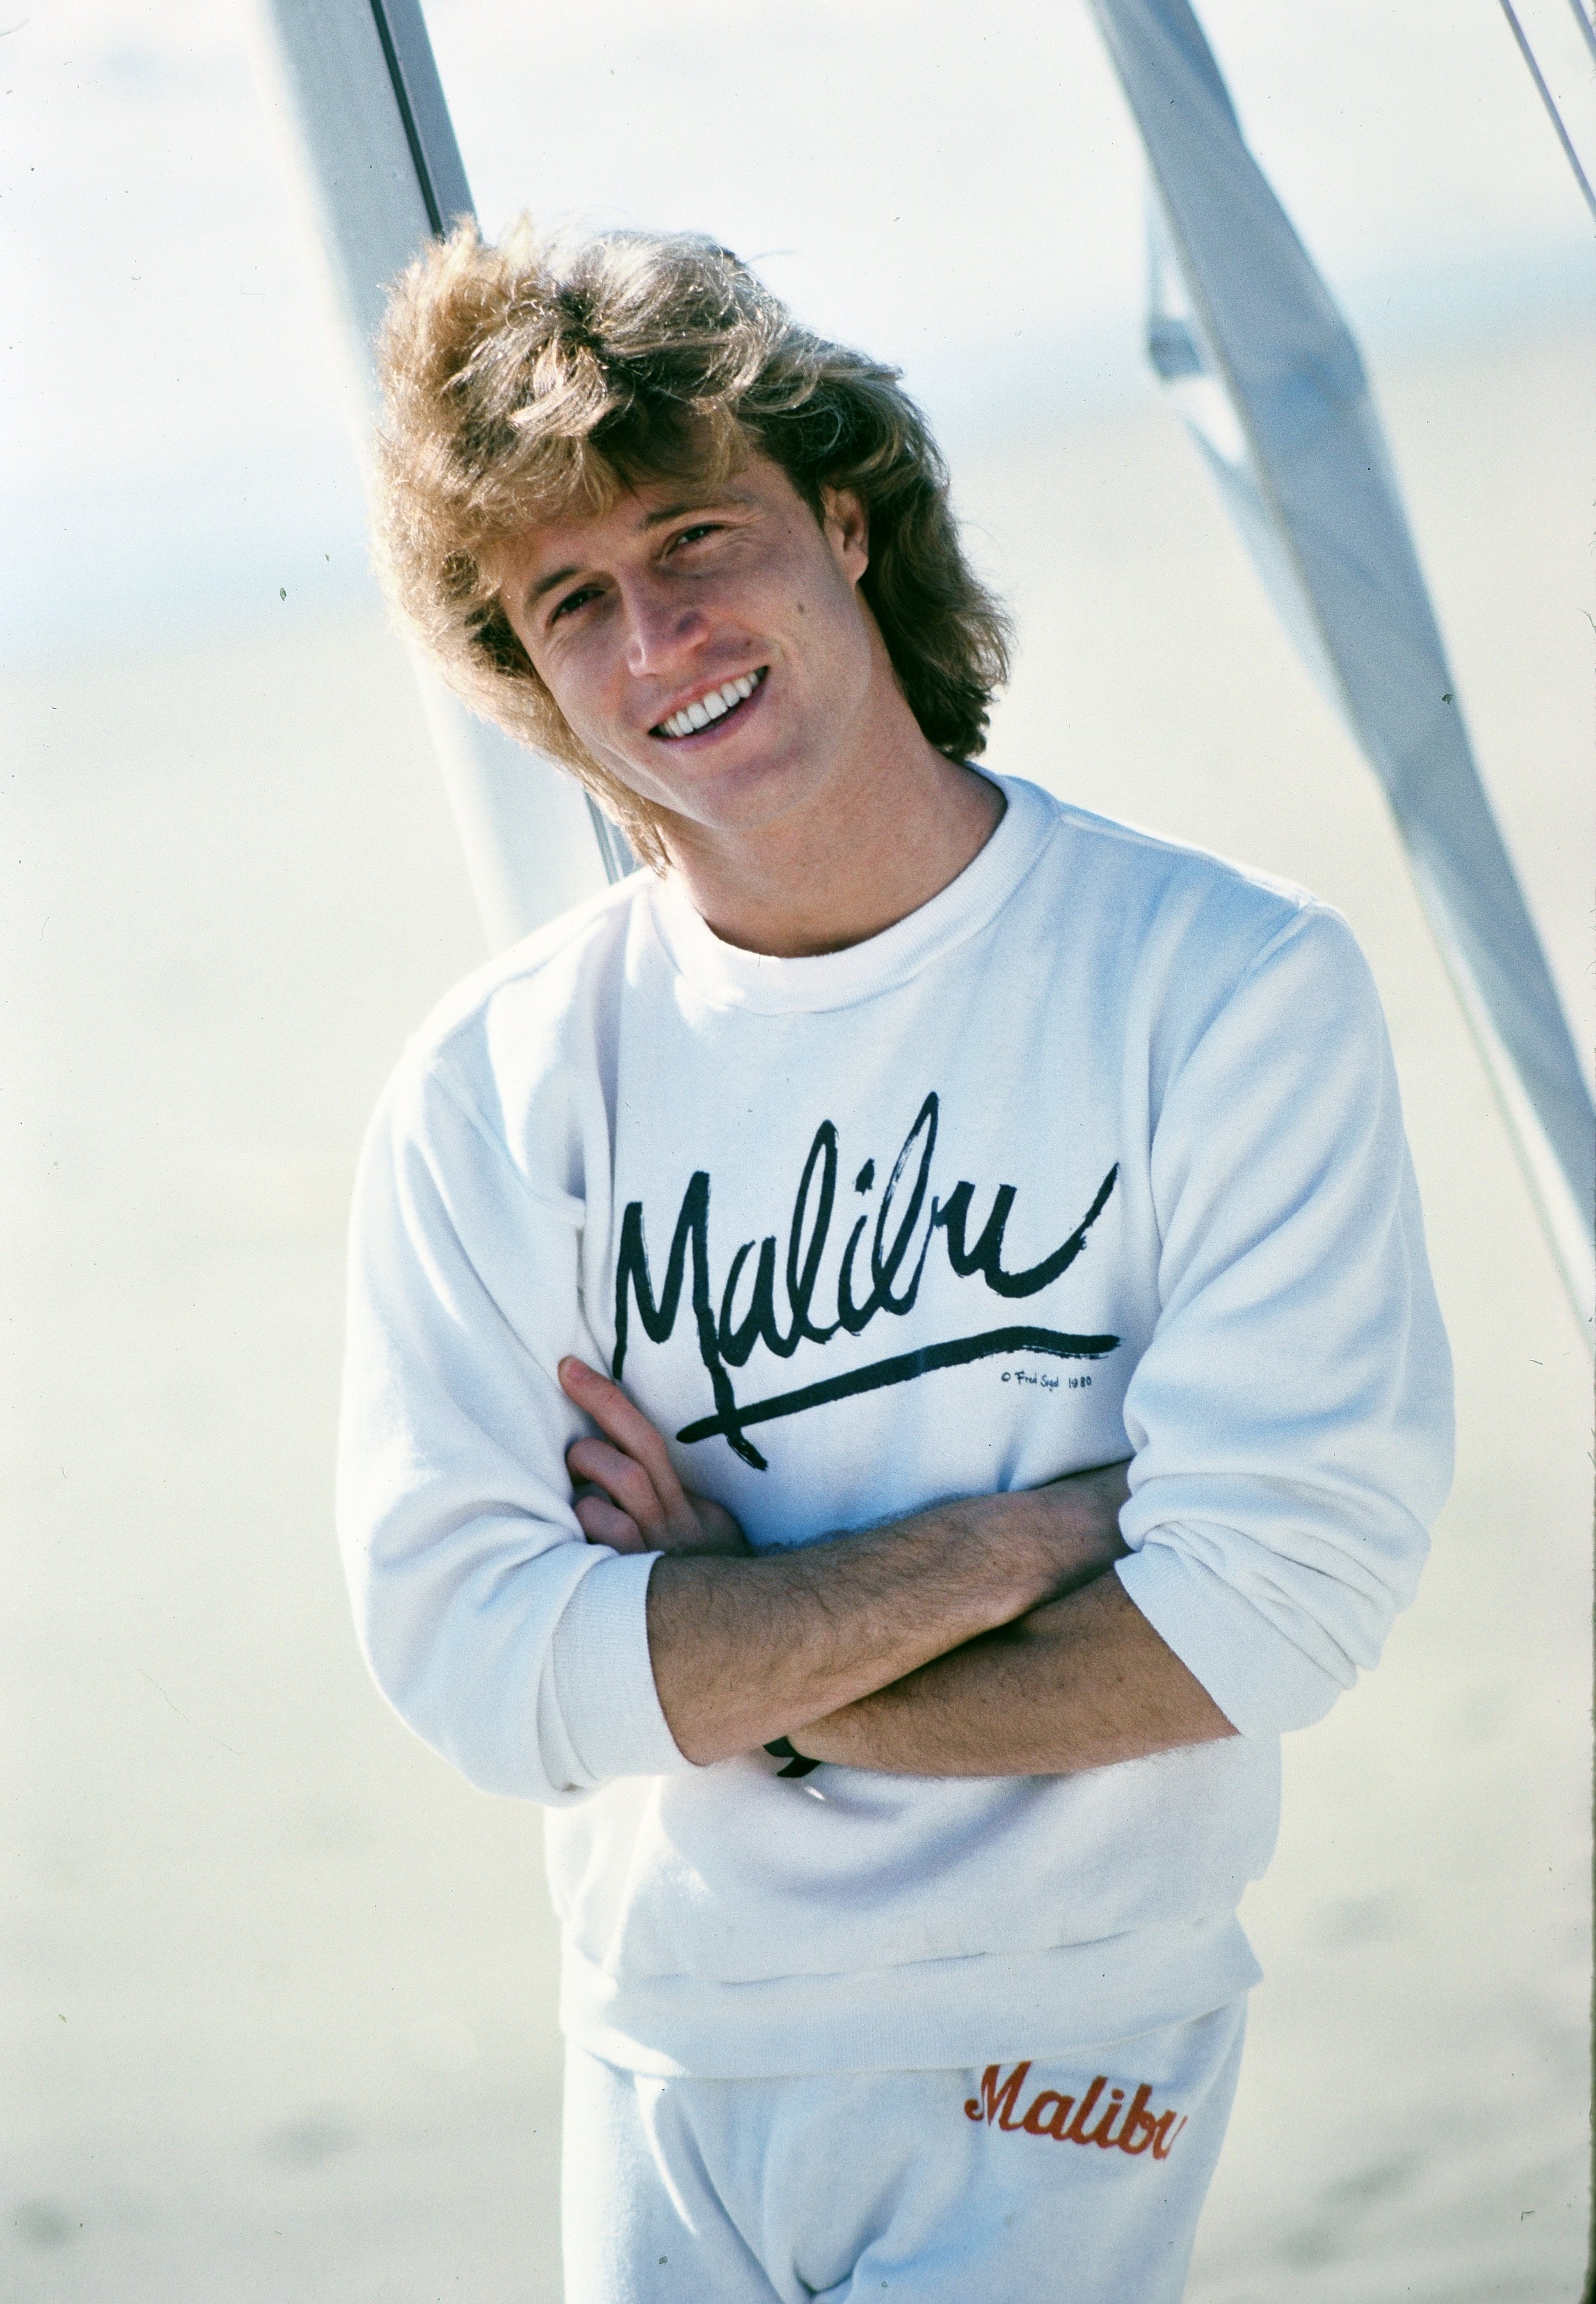 Andy Gibb posant pour une photo vers 1980 | Source : Getty Images